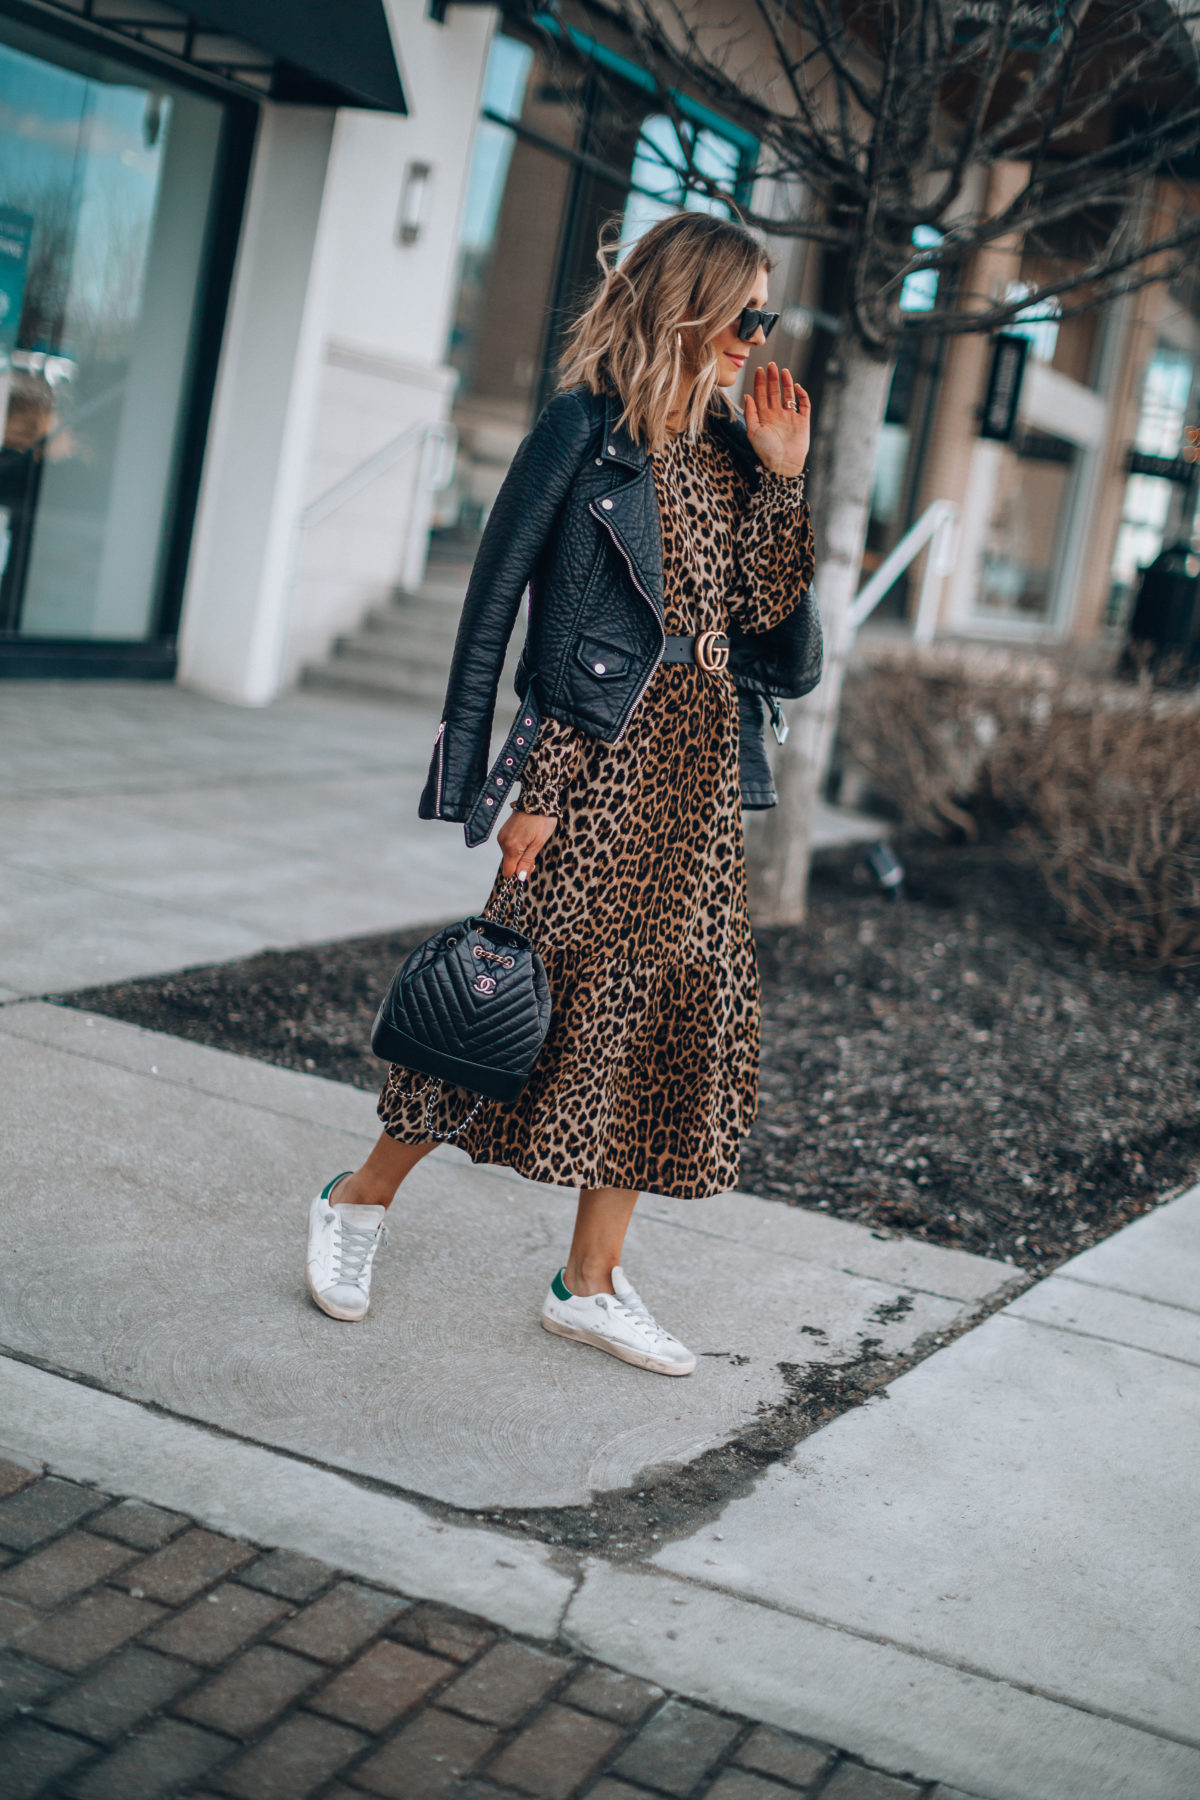 The $35 Leopard Dress You Need for Spring